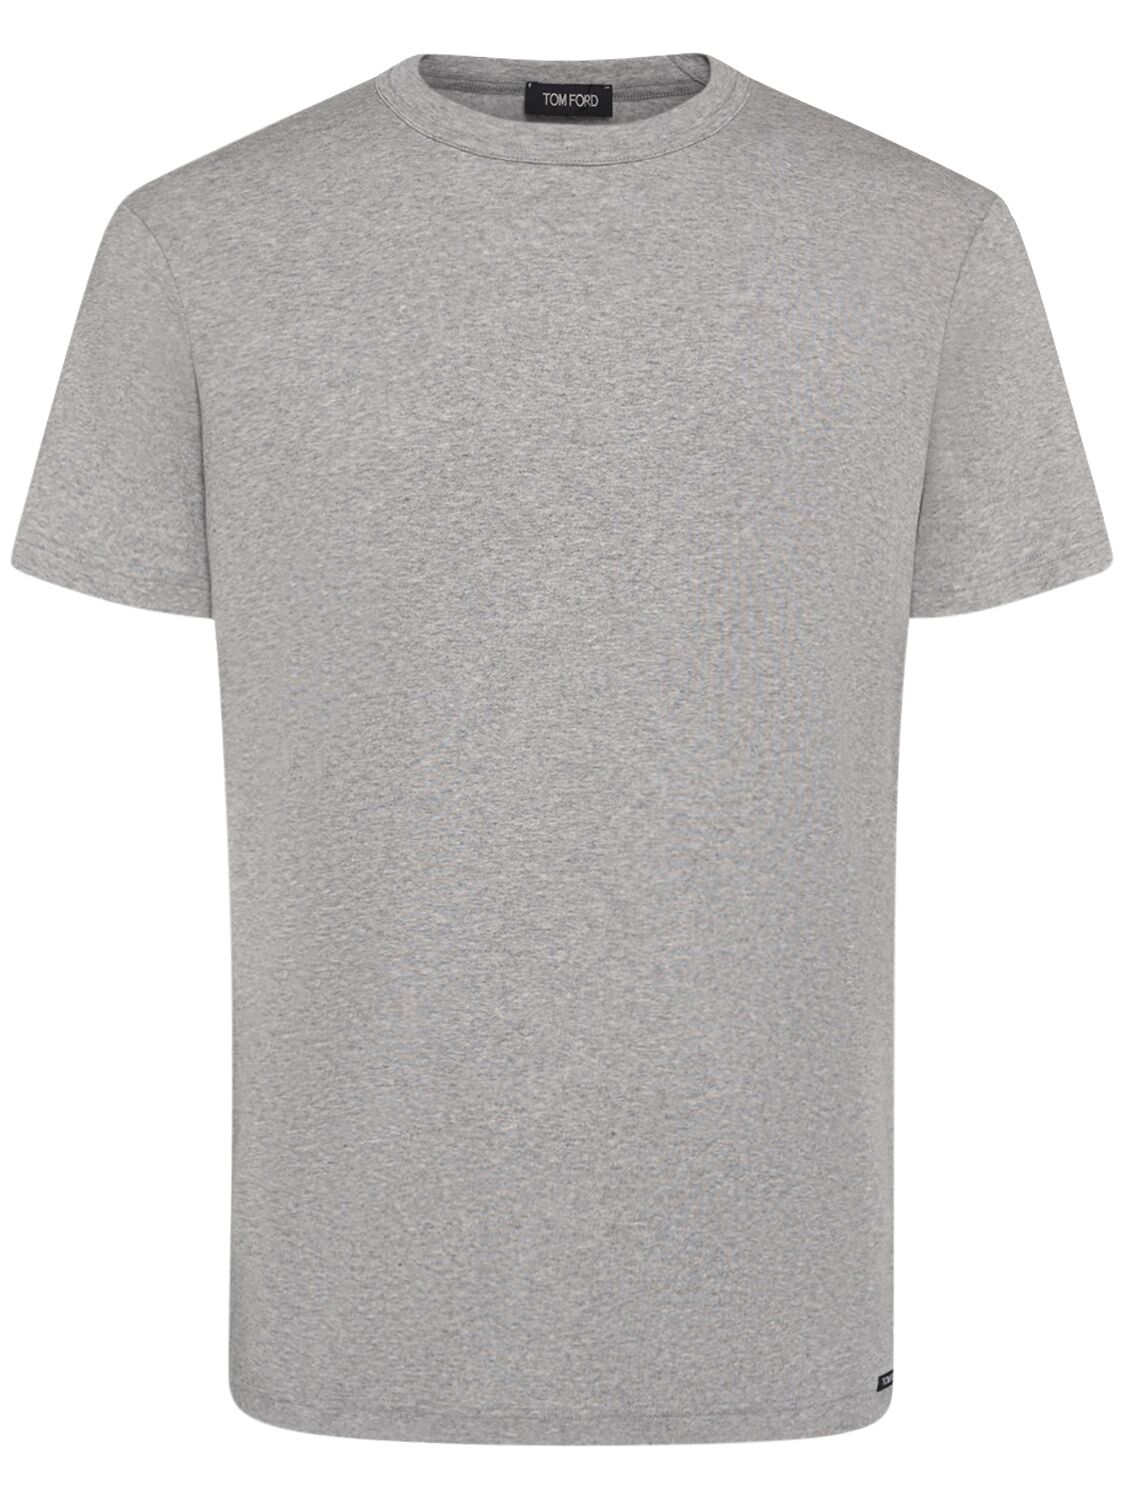 Tom Ford Cotton Jersey Crewneck T-shirt In Gray